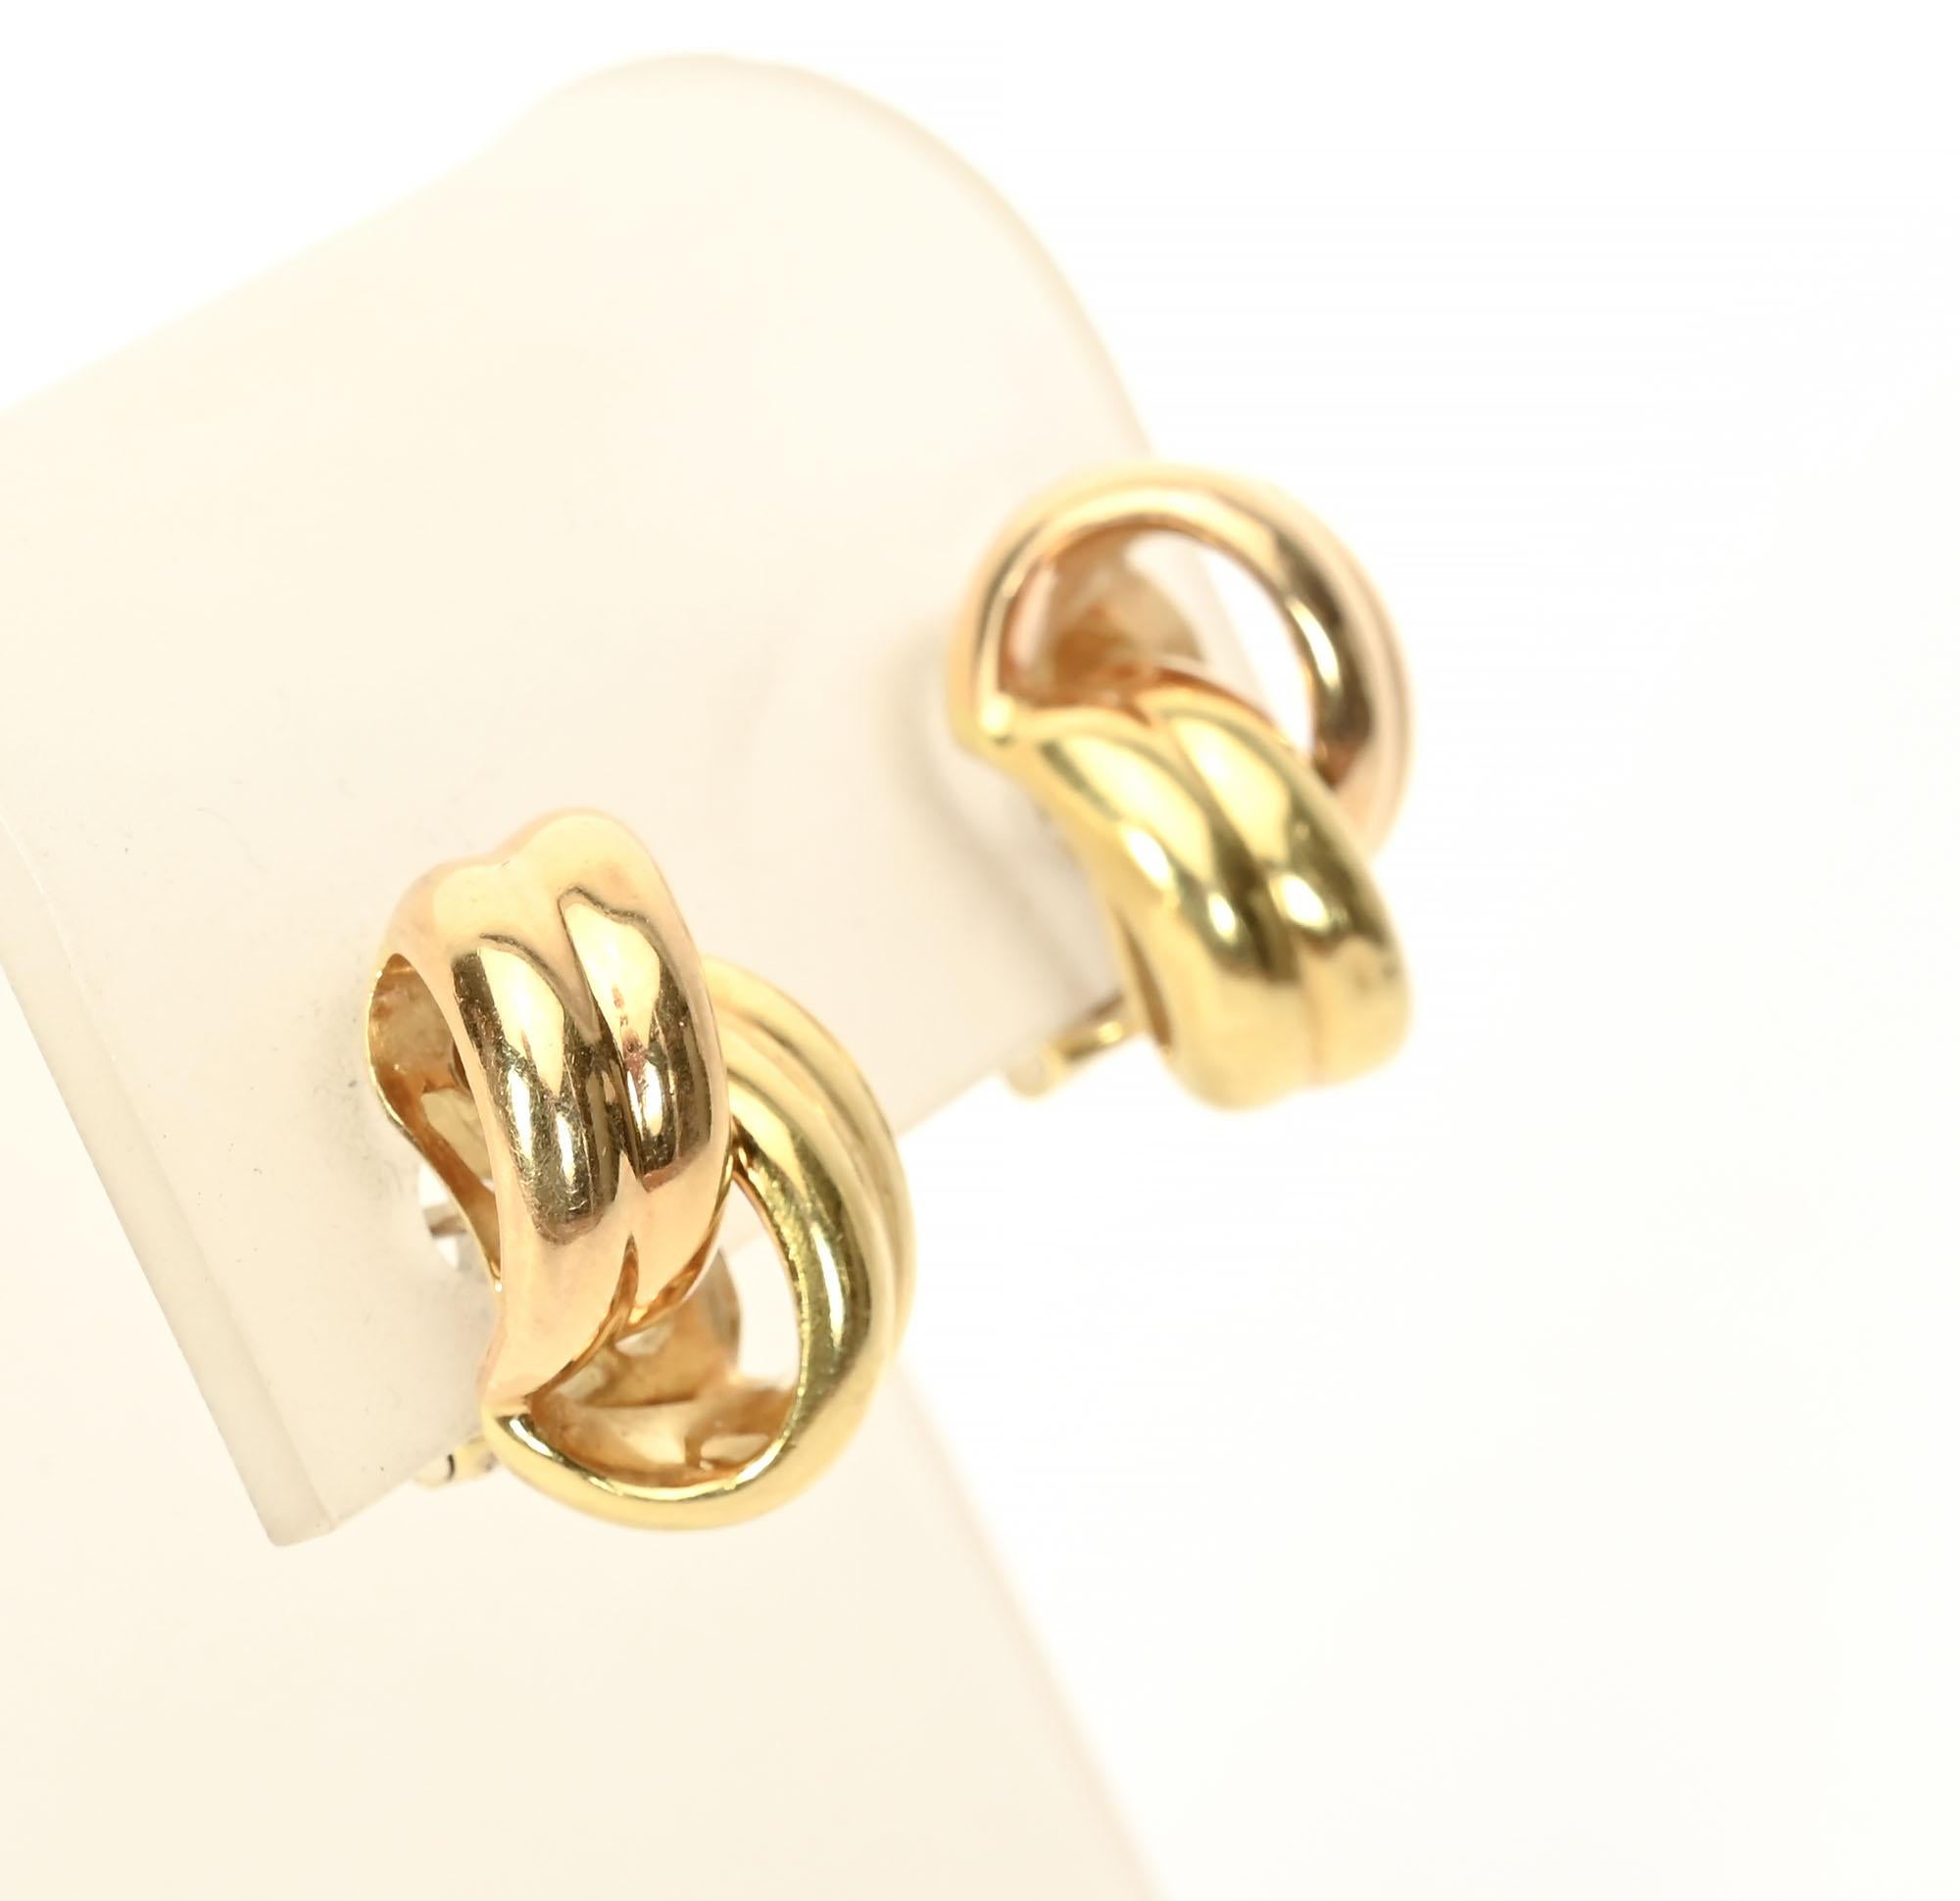 Double loop earrings in 18 karat gold by Roberto Coin. The huggie size earrings have an two loops that intertwine with each other. Backs are posts and clips. The earrings measure 5/8